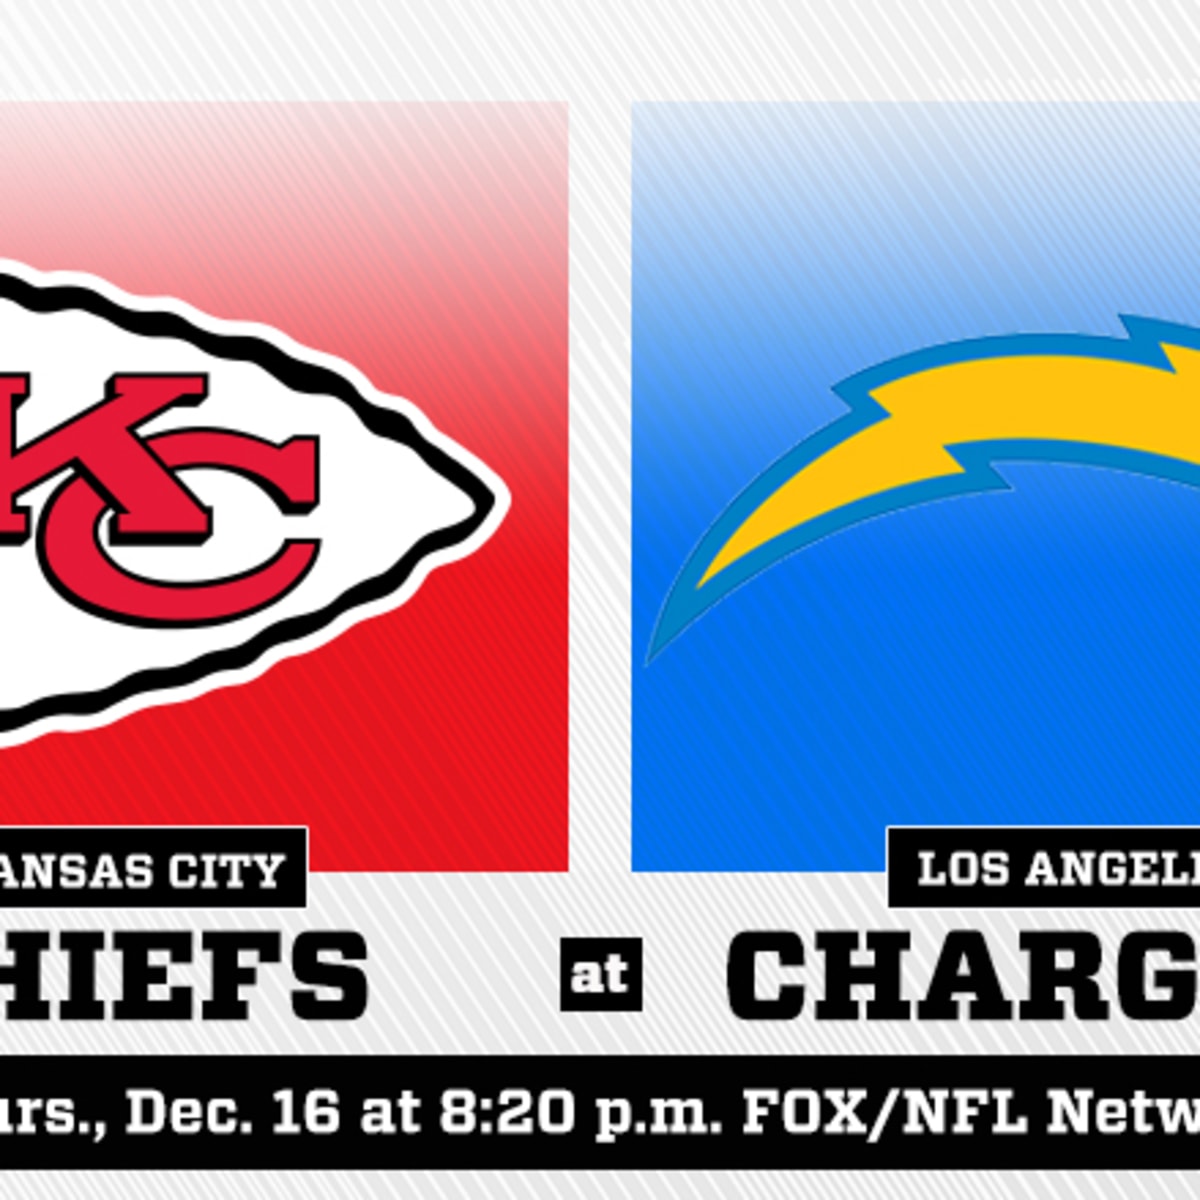 kansas city chargers tickets